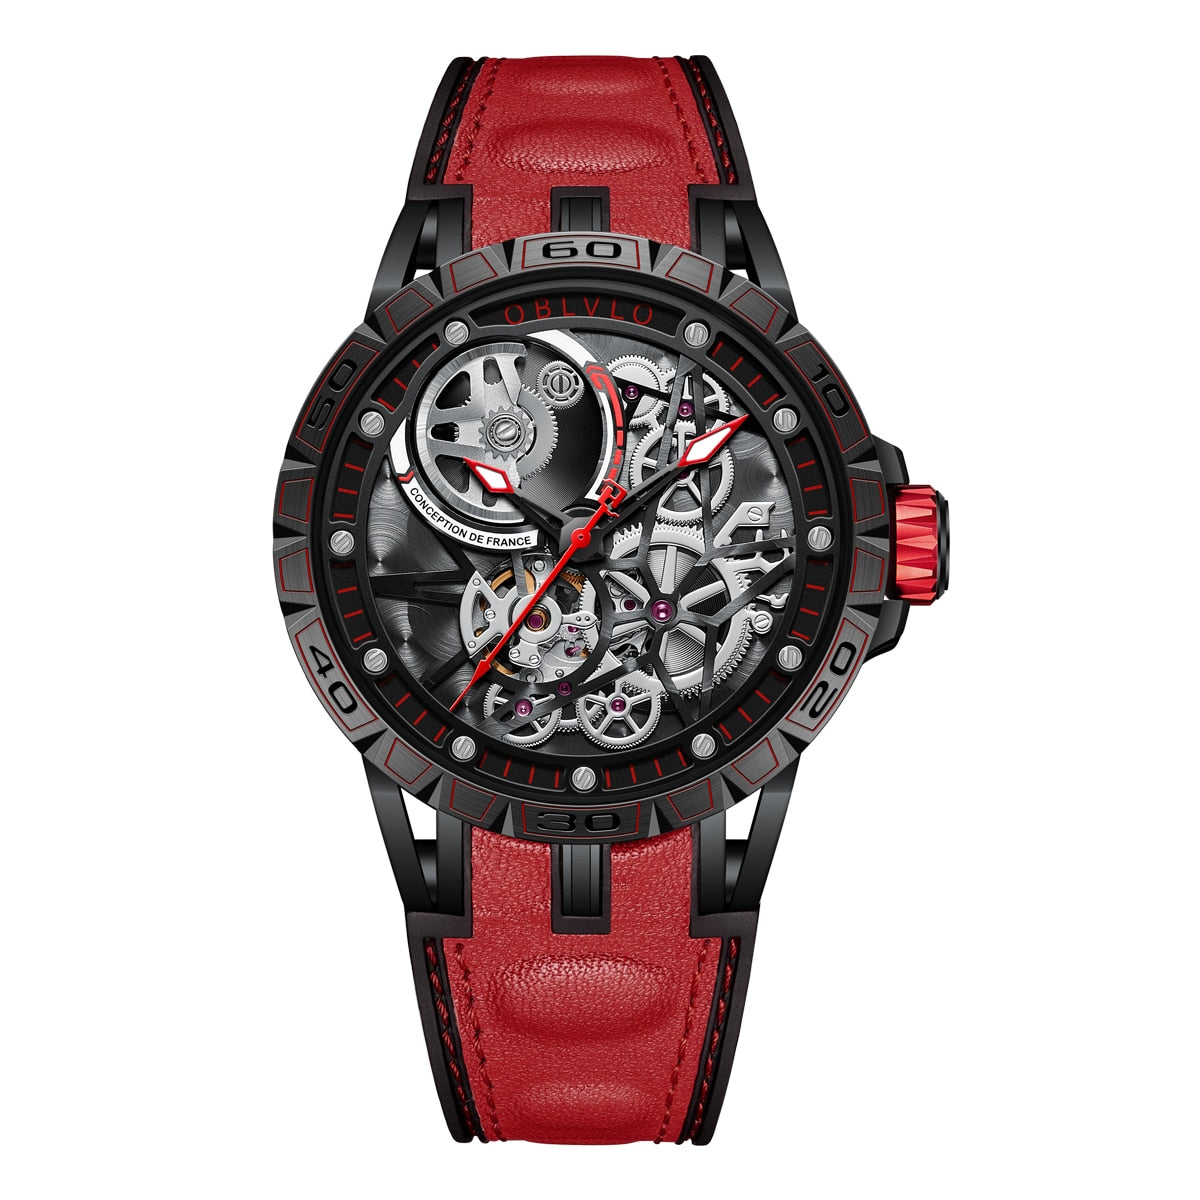 Red/Black Oblvlo LM Skeleton Sport, Automatic Self-Wind Mechanical Watch from fiveto.co.uk